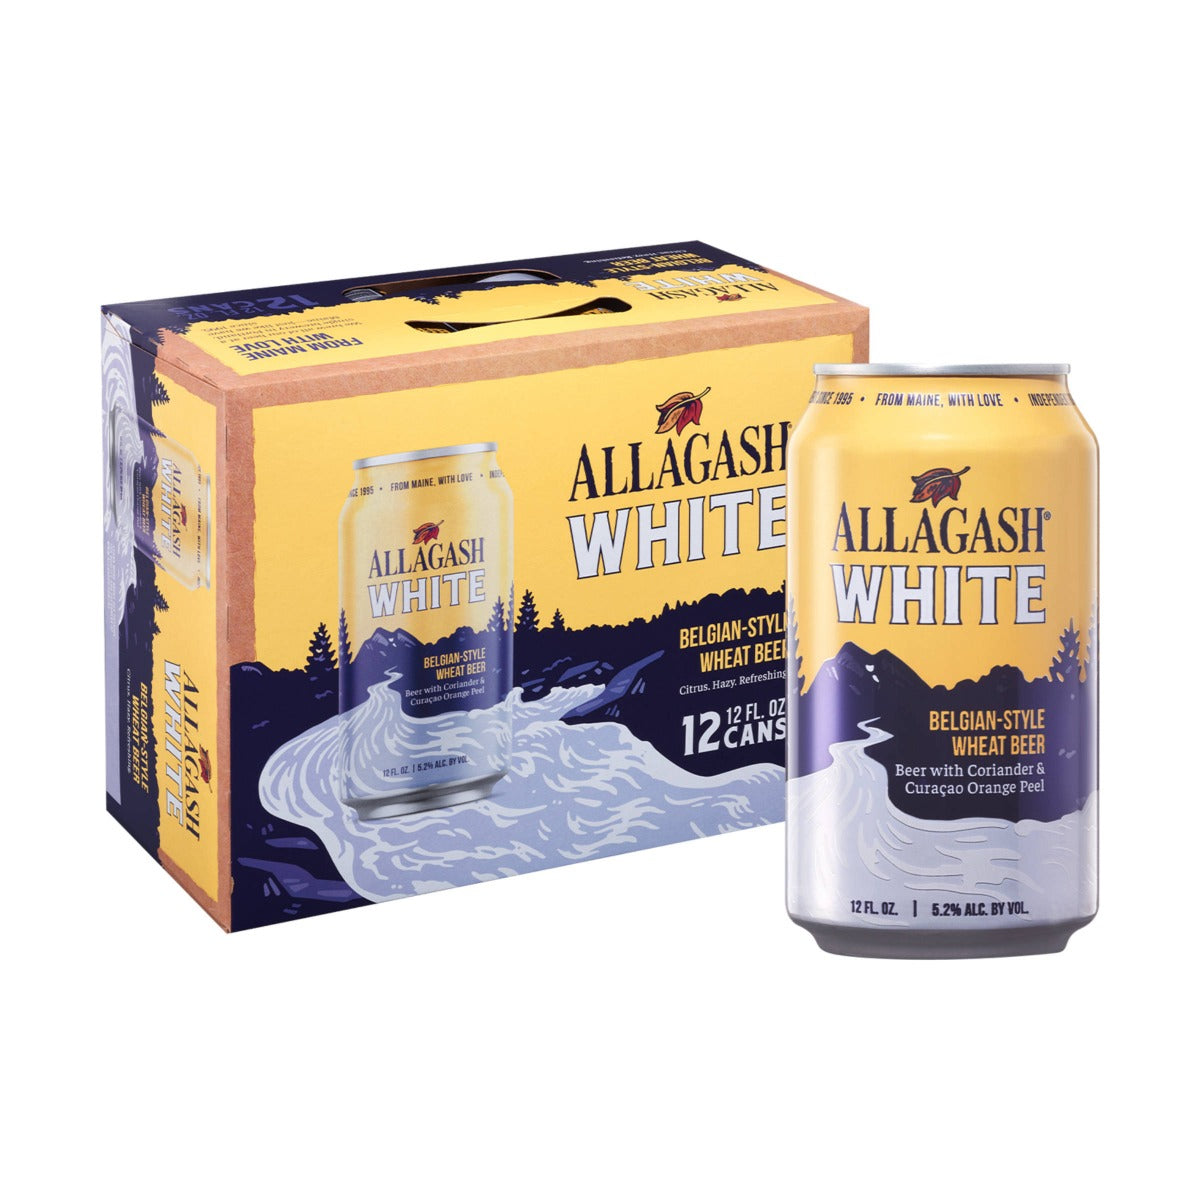 ALLAGASH WHITE BELGIAN STYLE WHEAT BEER 12X12OZ CANS